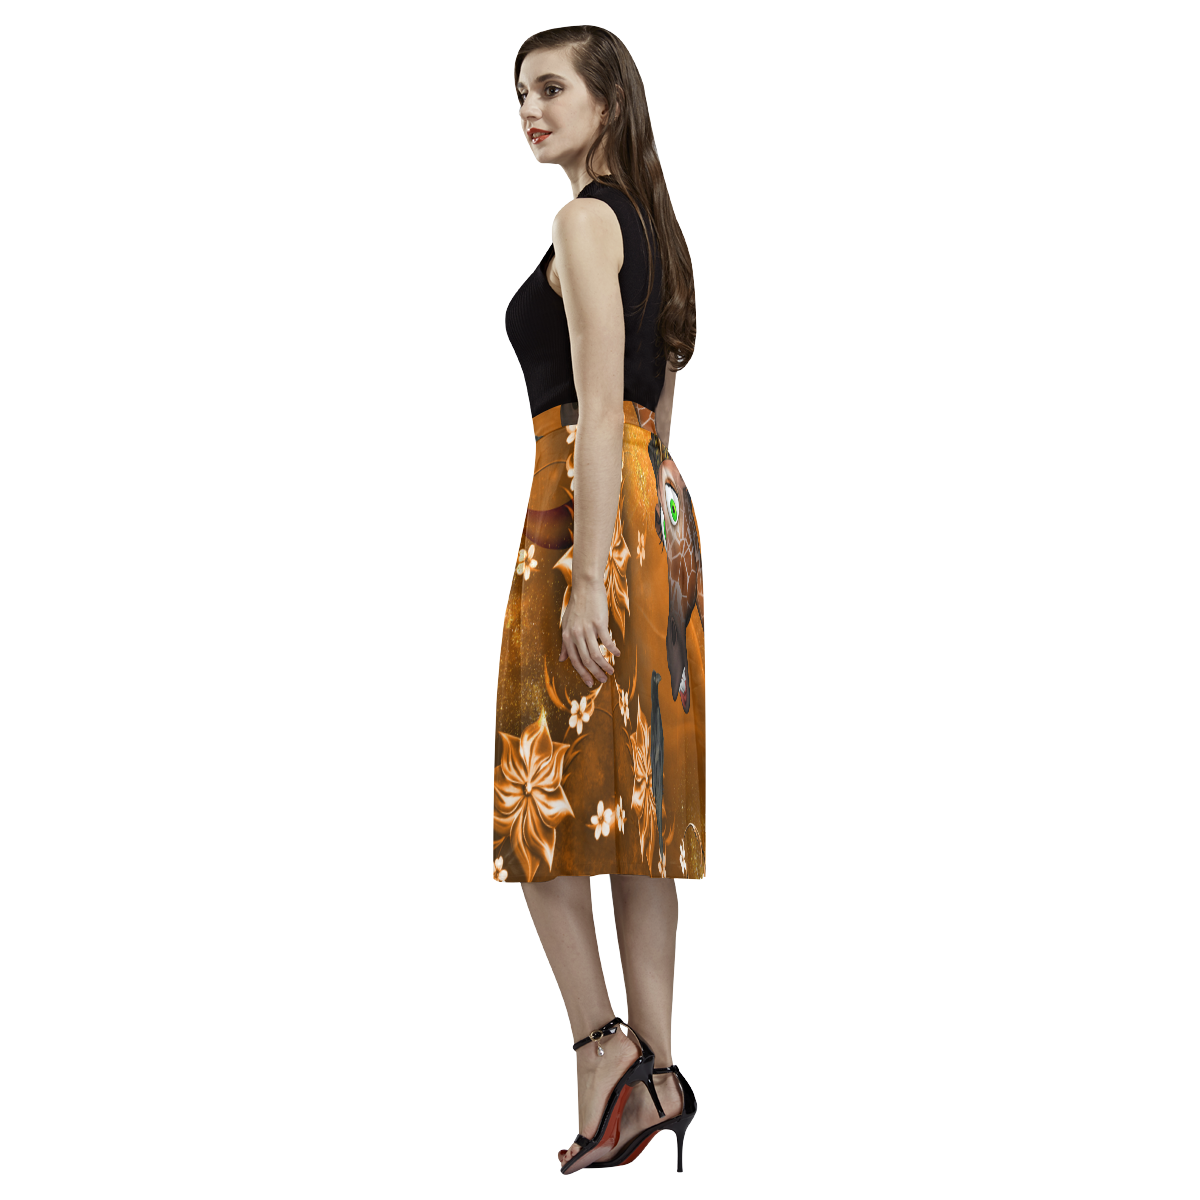 Funny giraffe with feathers Aoede Crepe Skirt (Model D16)